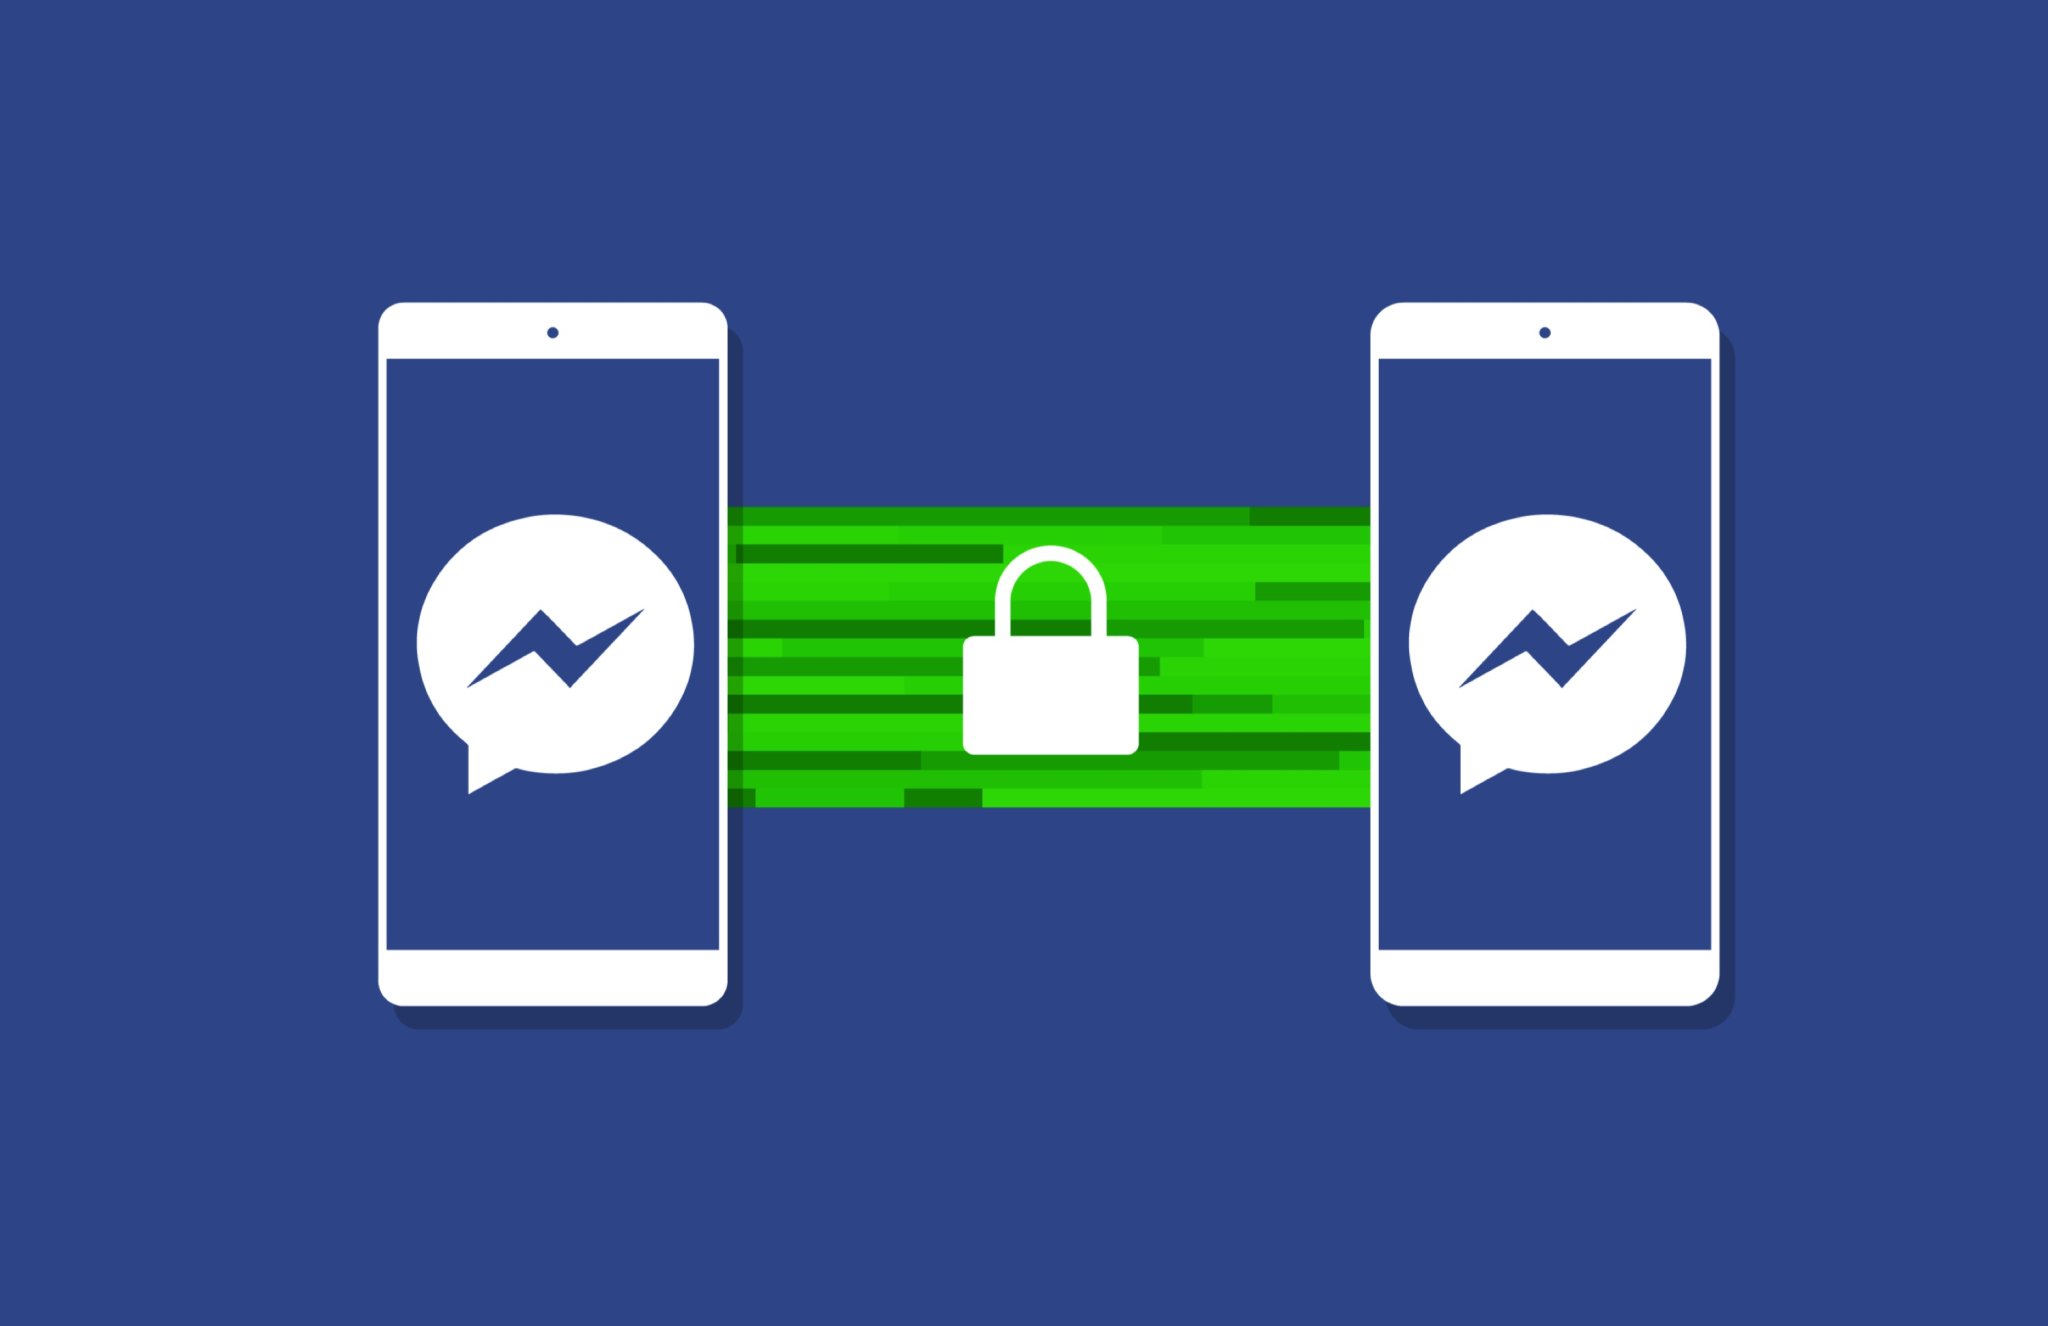 Facebook is bringing end-to-end encryption to Messenger calls and Instagram DMs